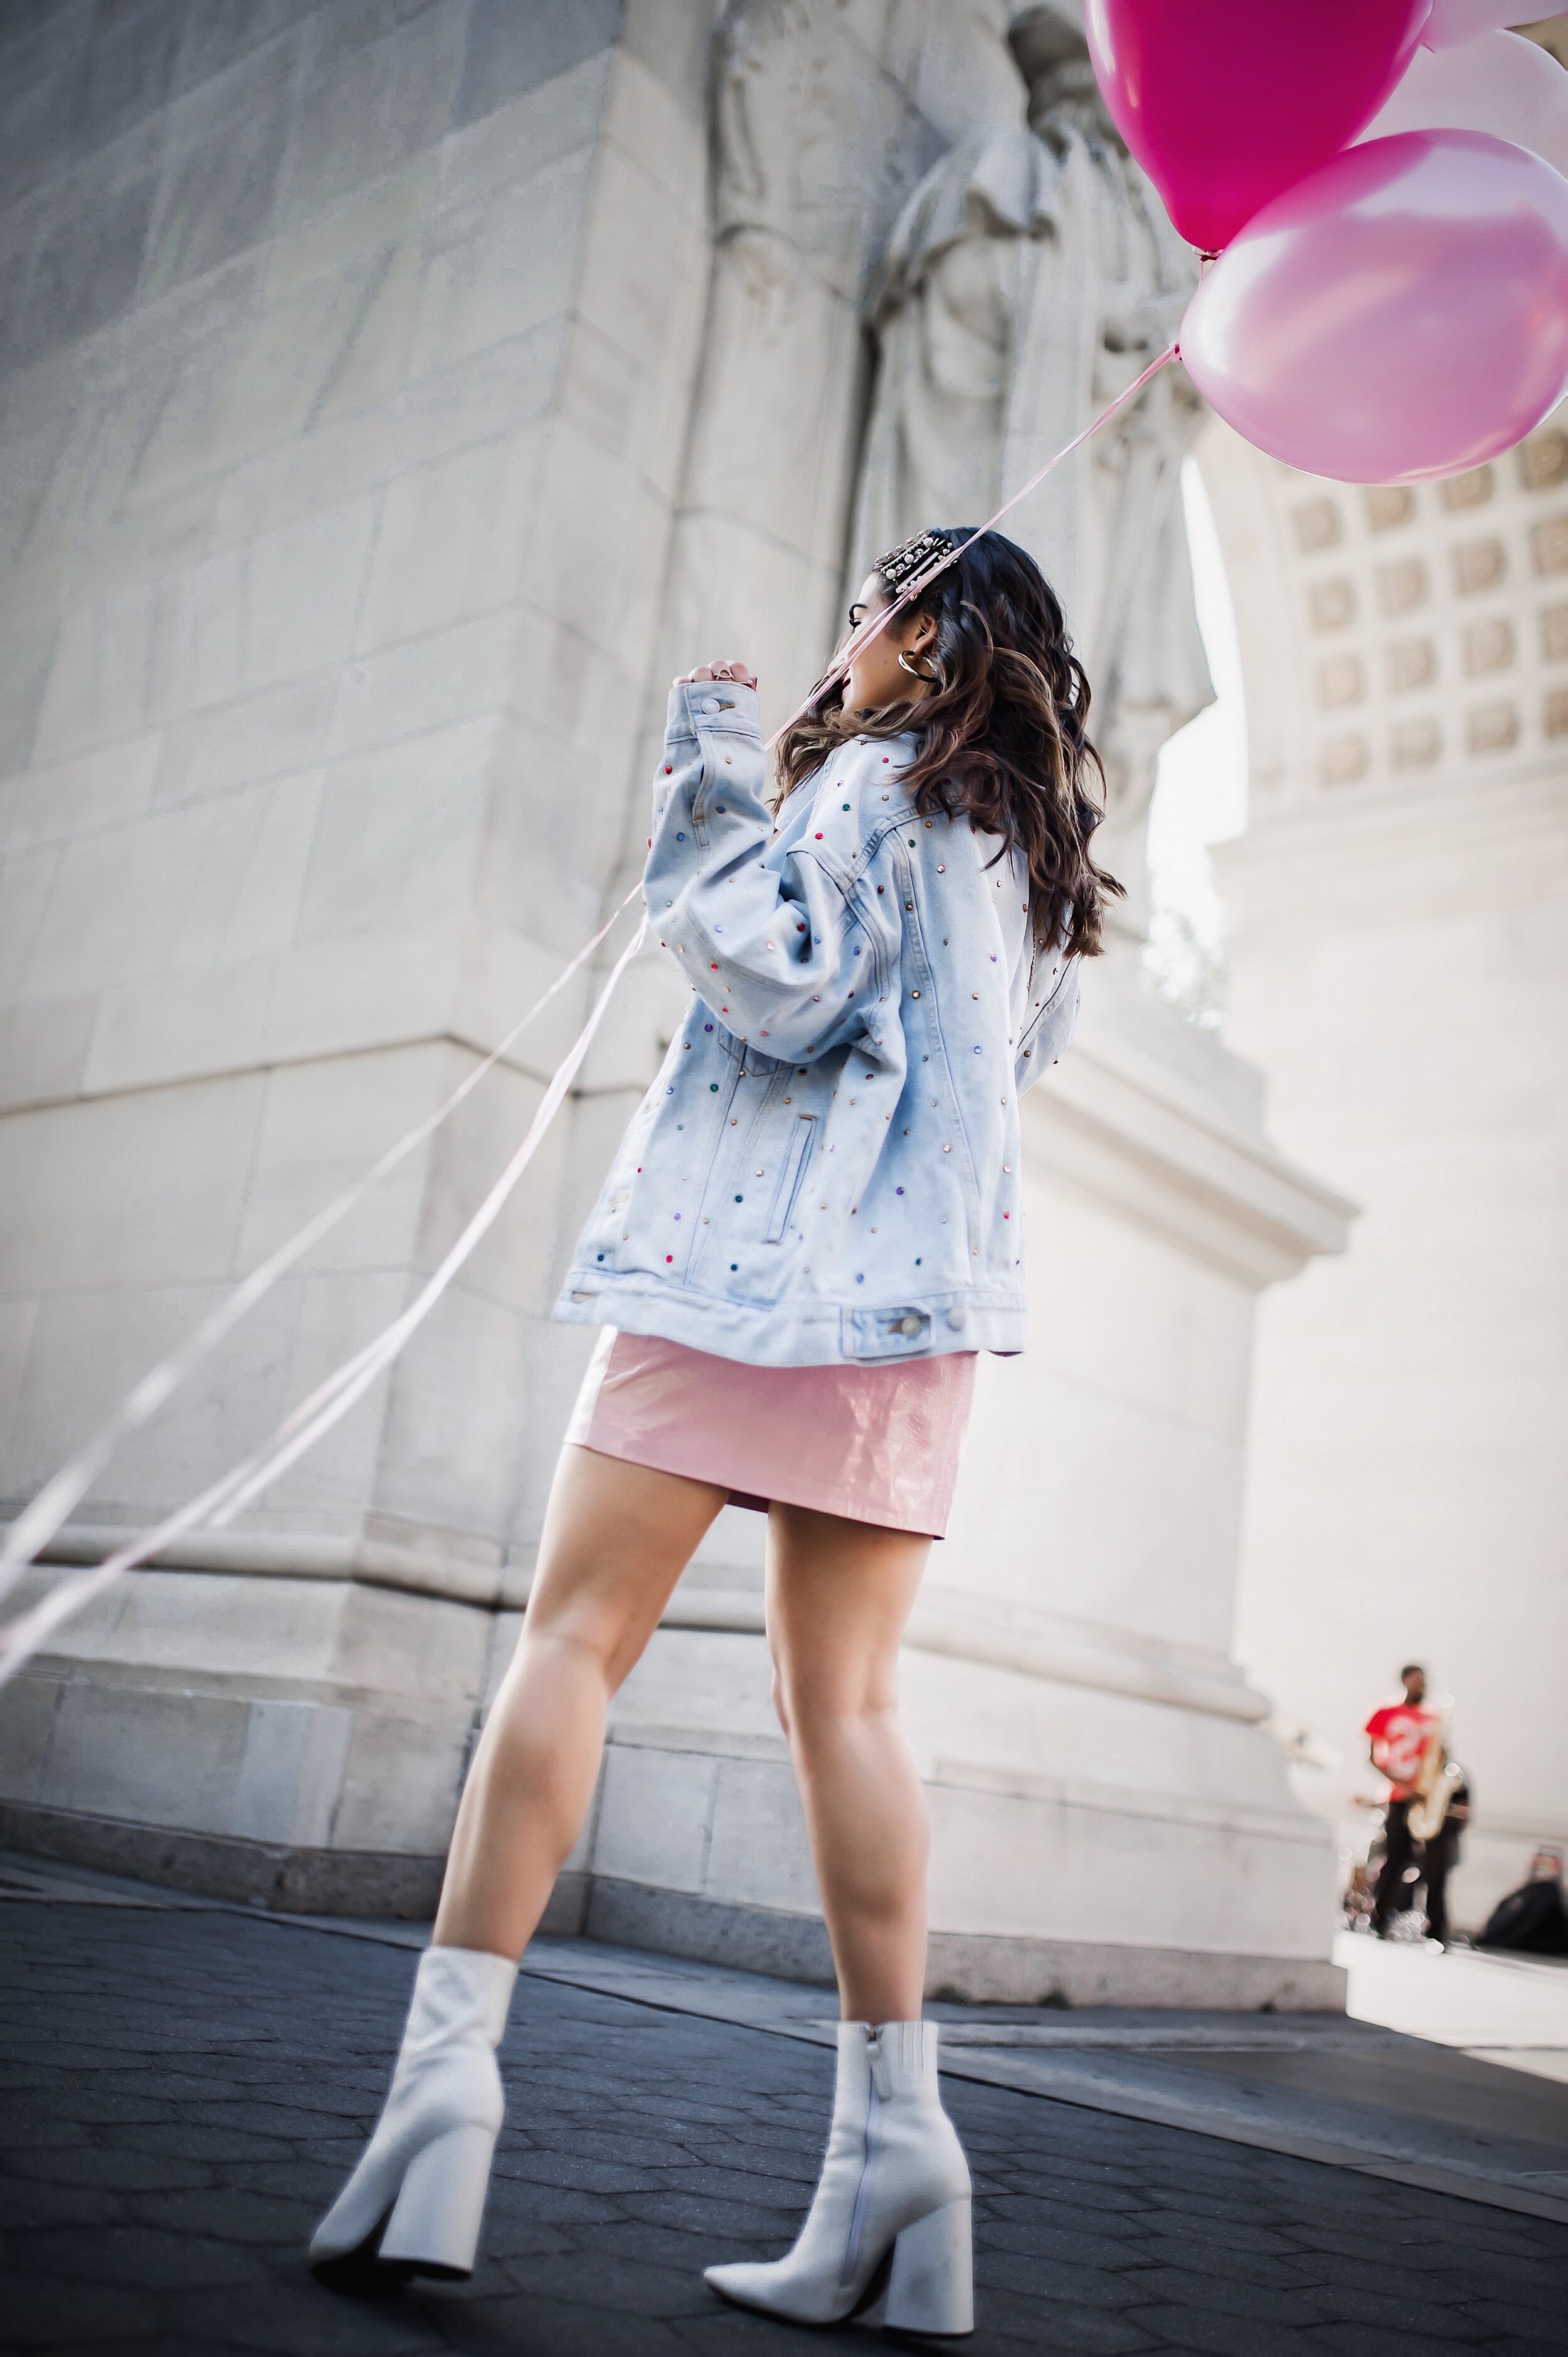 The Final Year Of My 20's Happy 29th Birthday Esther Santer NYC Street Style Blogger White Booties Trend Jeweled Jean Jacket Levis Denim Pink Balooons Leather Skirt Hair Clips Accessories Pastel Blue Shoes New Yoek City Inspo Shoot Washington  Square.JPG